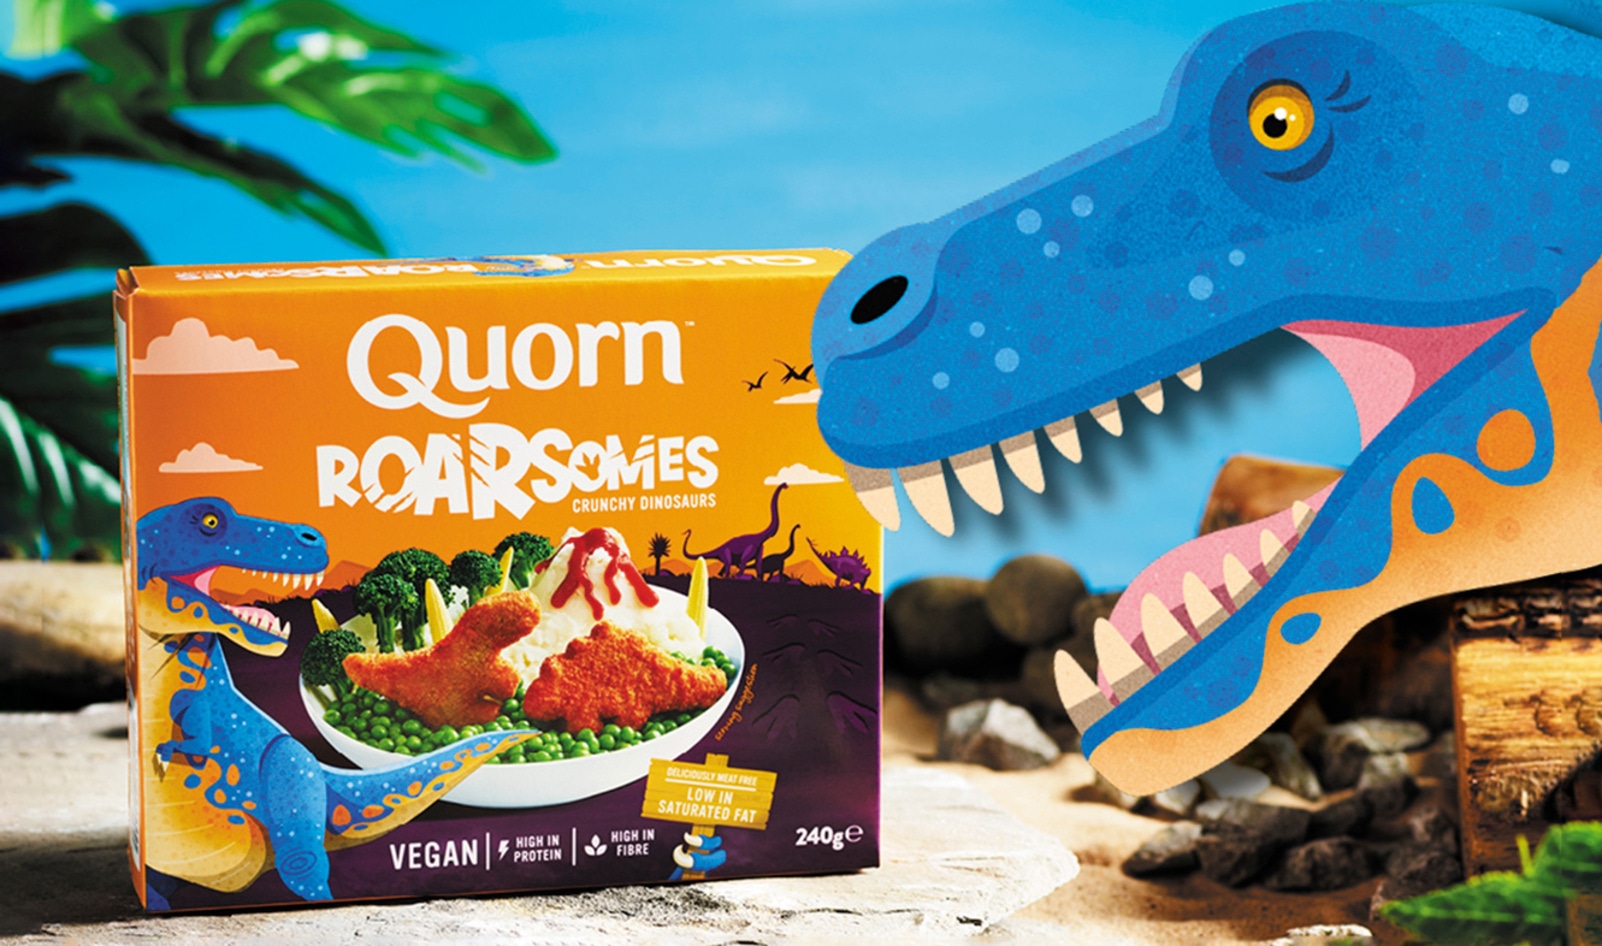 Drunk Fan Email Becomes Reality: Quorn Fans Now Have Dinosaur Vegan Nuggets